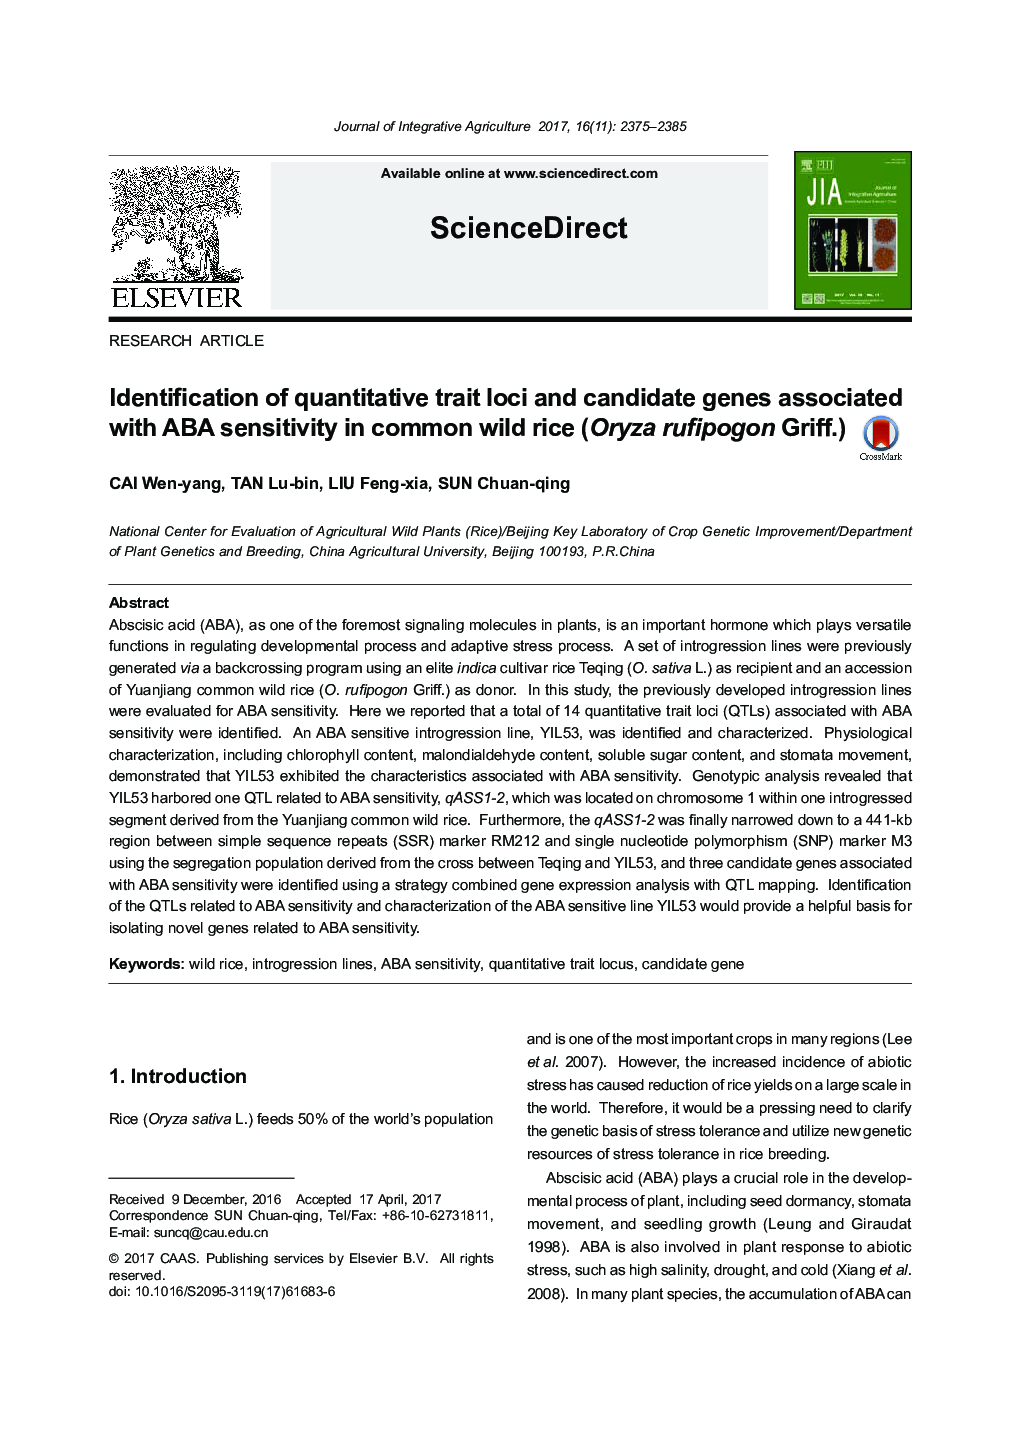 Identification of quantitative trait loci and candidate genes associated with ABA sensitivity in common wild rice (Oryza rufipogon Griff.)